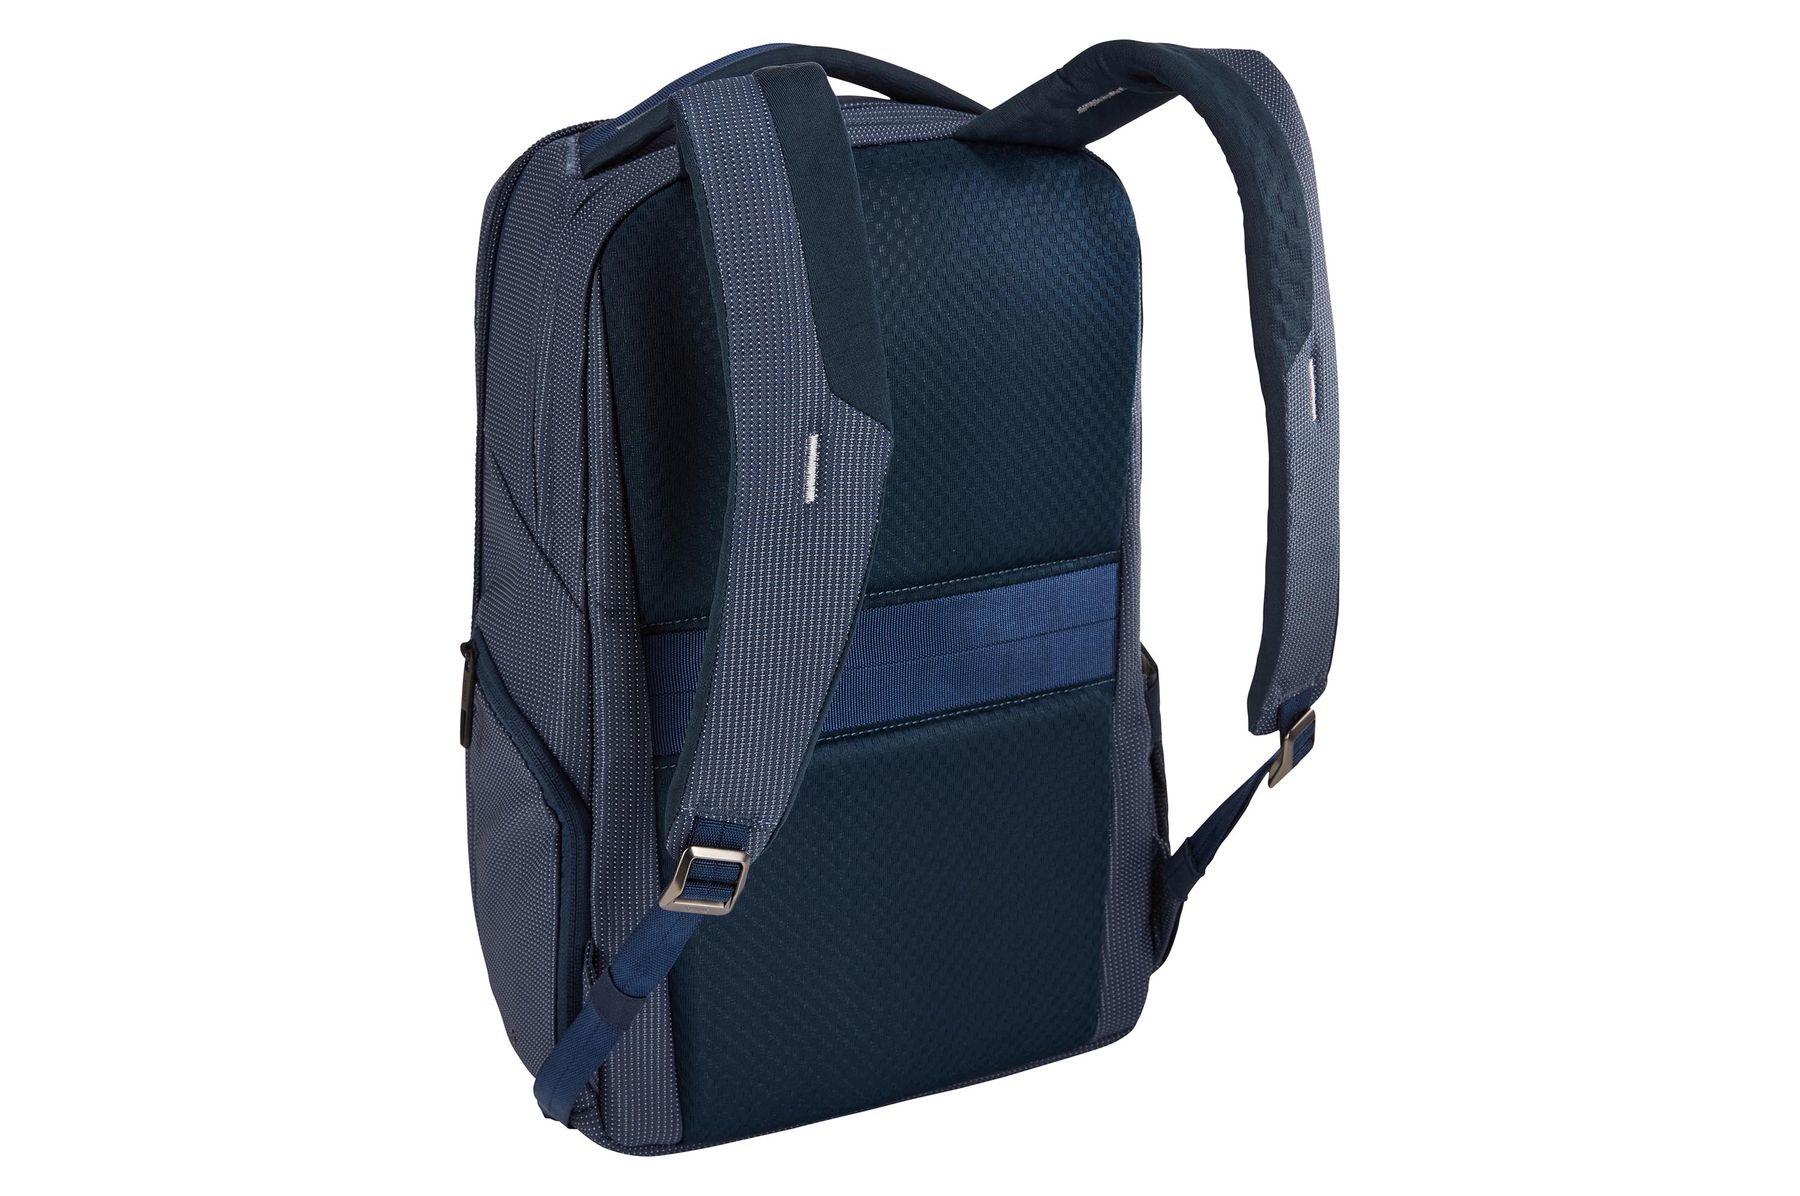 Thule Crossover 2 Backpack 20L Dress Blue